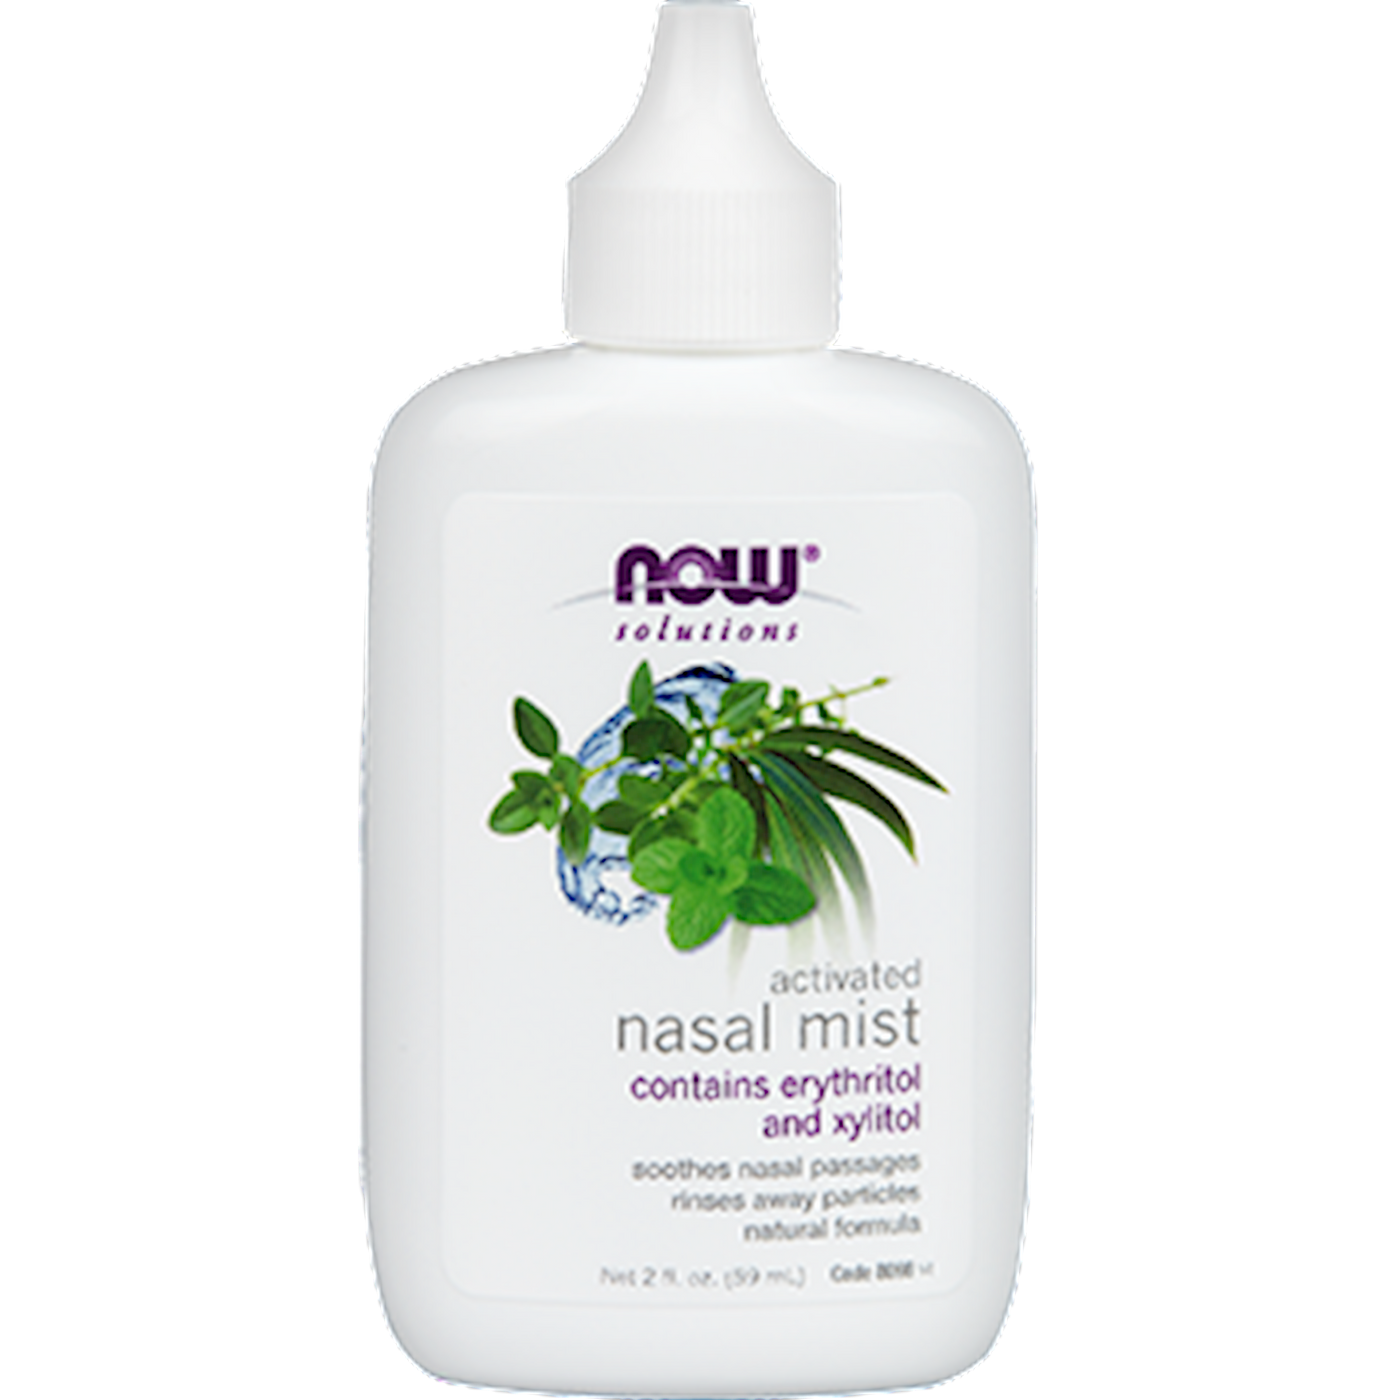 Activated Nasal Mist 2 fl oz Curated Wellness